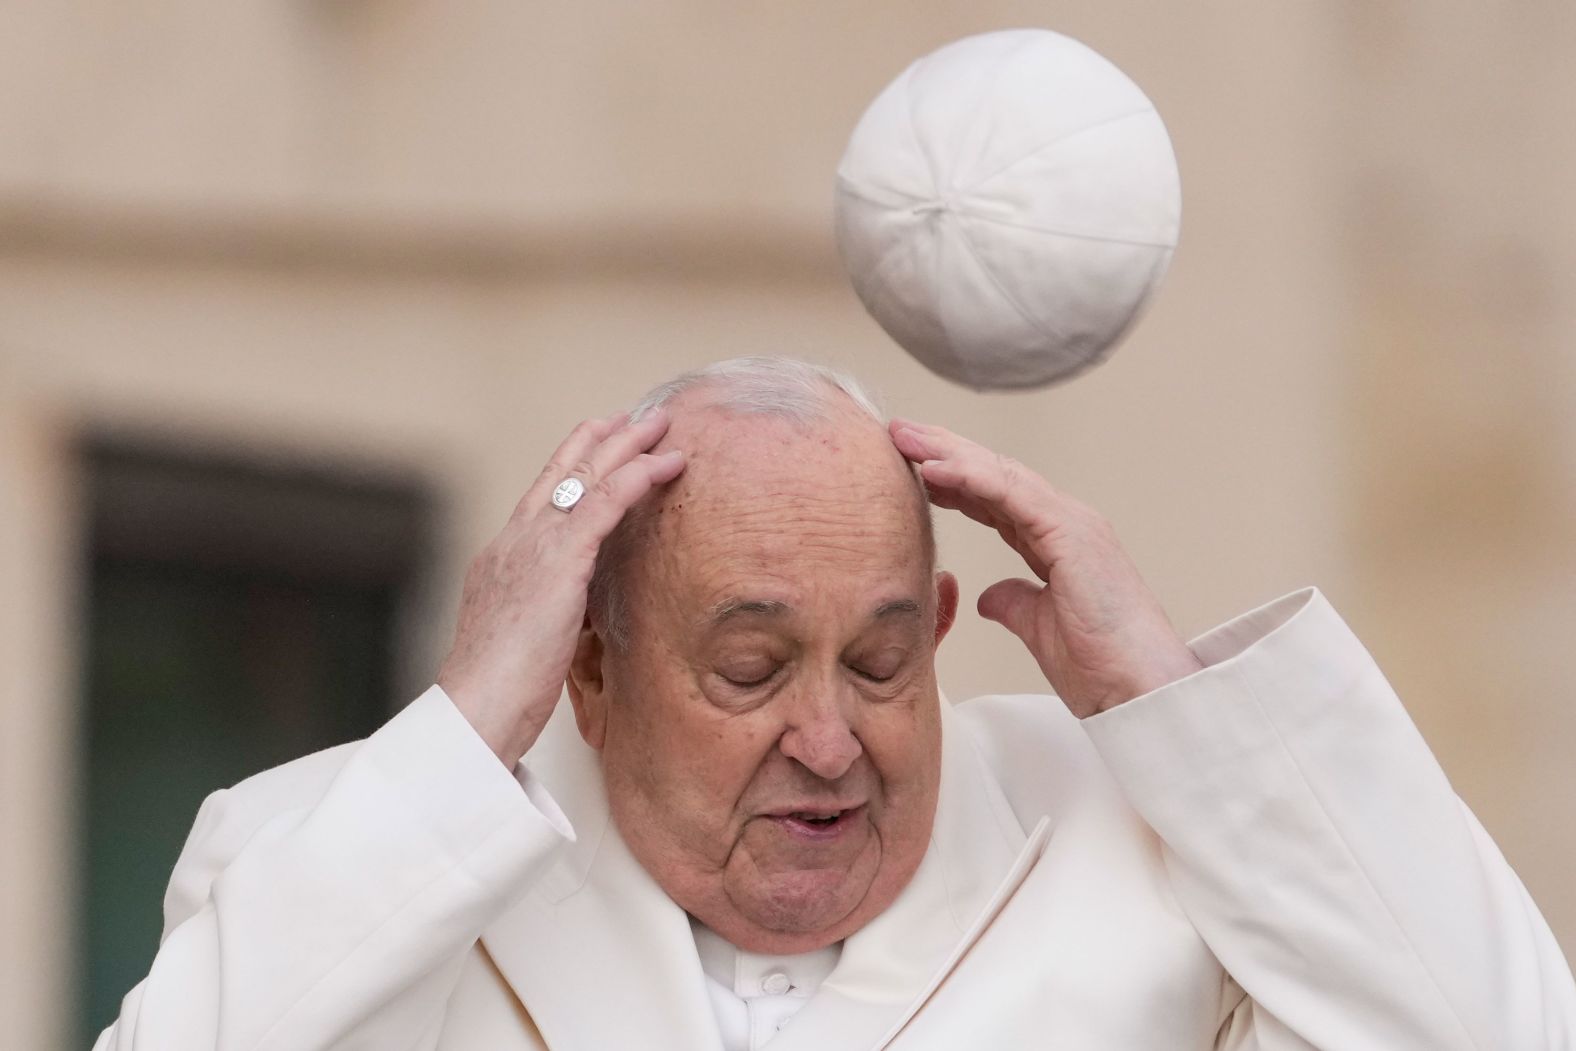 Pope Francis tries to catch his cap in St. Peter's Square as the wind blows it away at the Vatican on Wednesday, March 13.